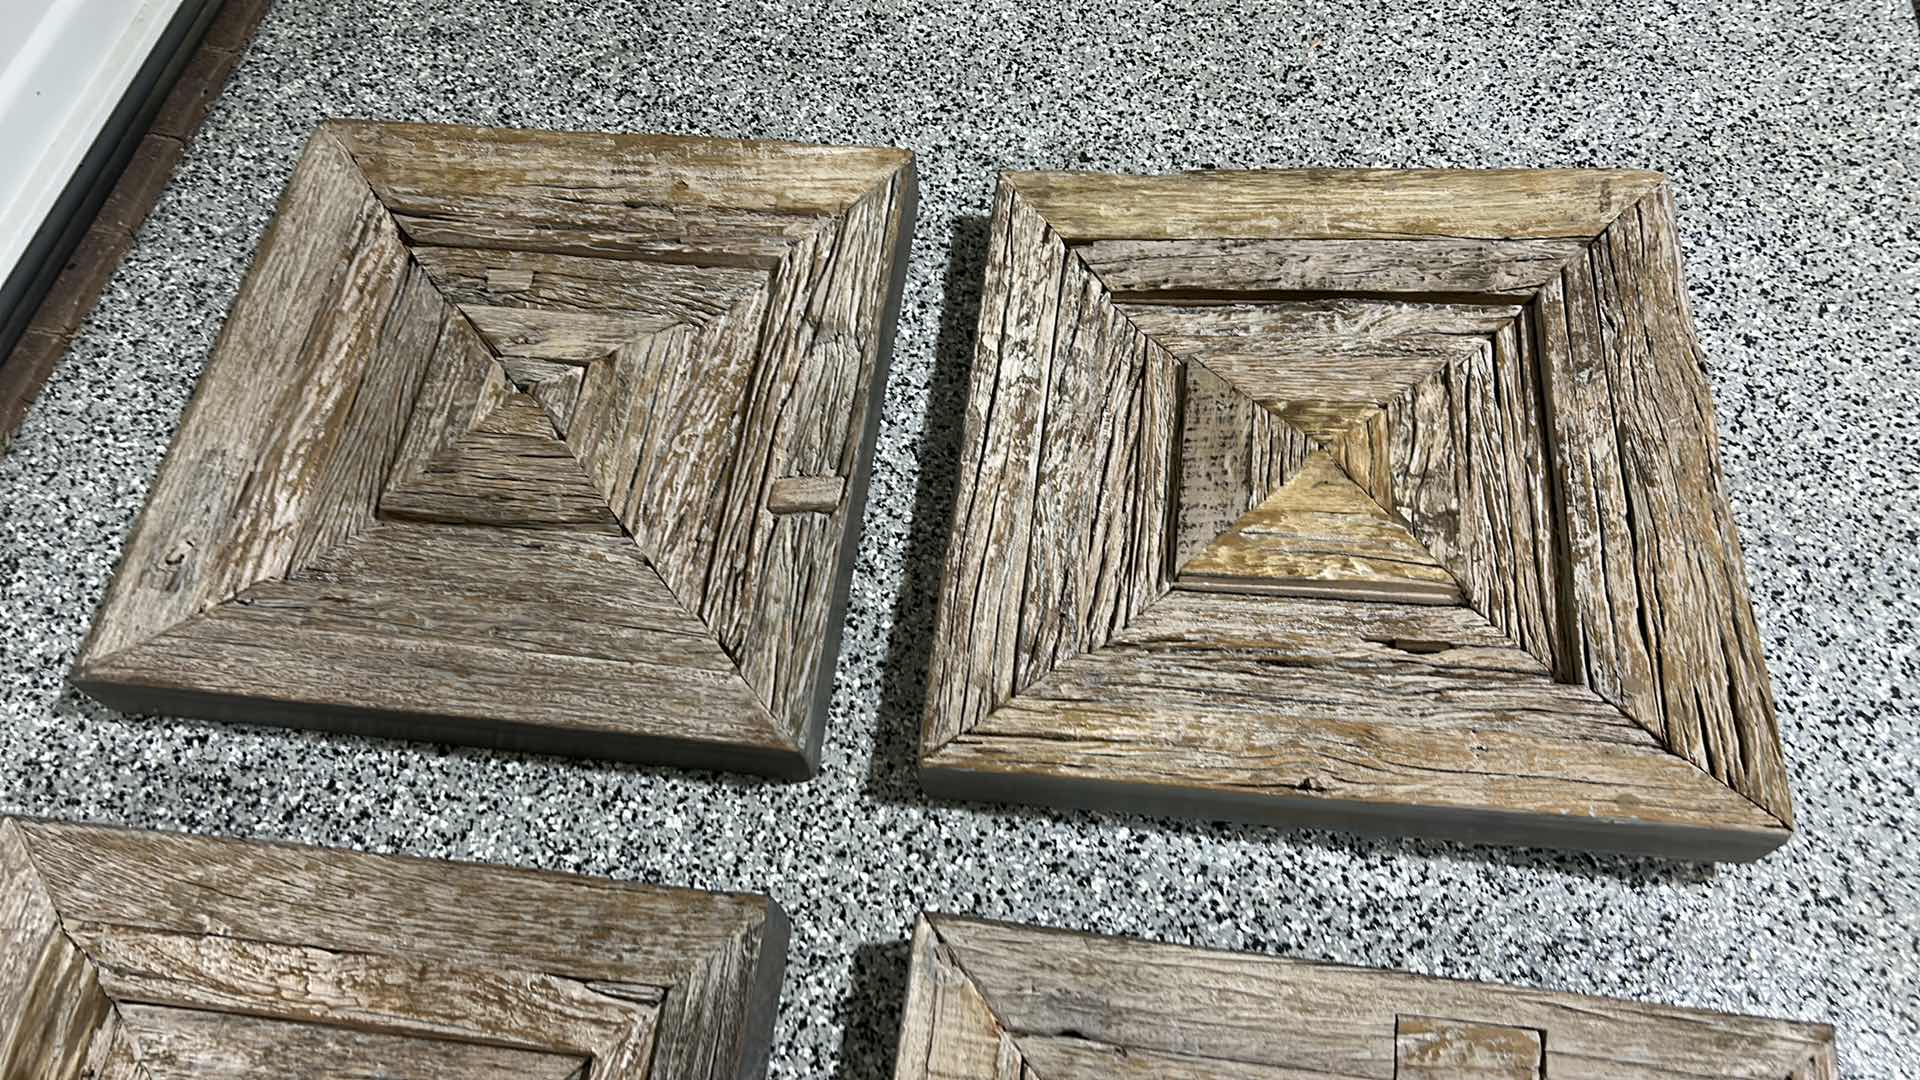 Photo 4 of 5 HEAVY RUSTIC WOOD WALL DECOR (EACH SQUARE IS SOLID WOOD 2’ x 2’ x 3” THICK